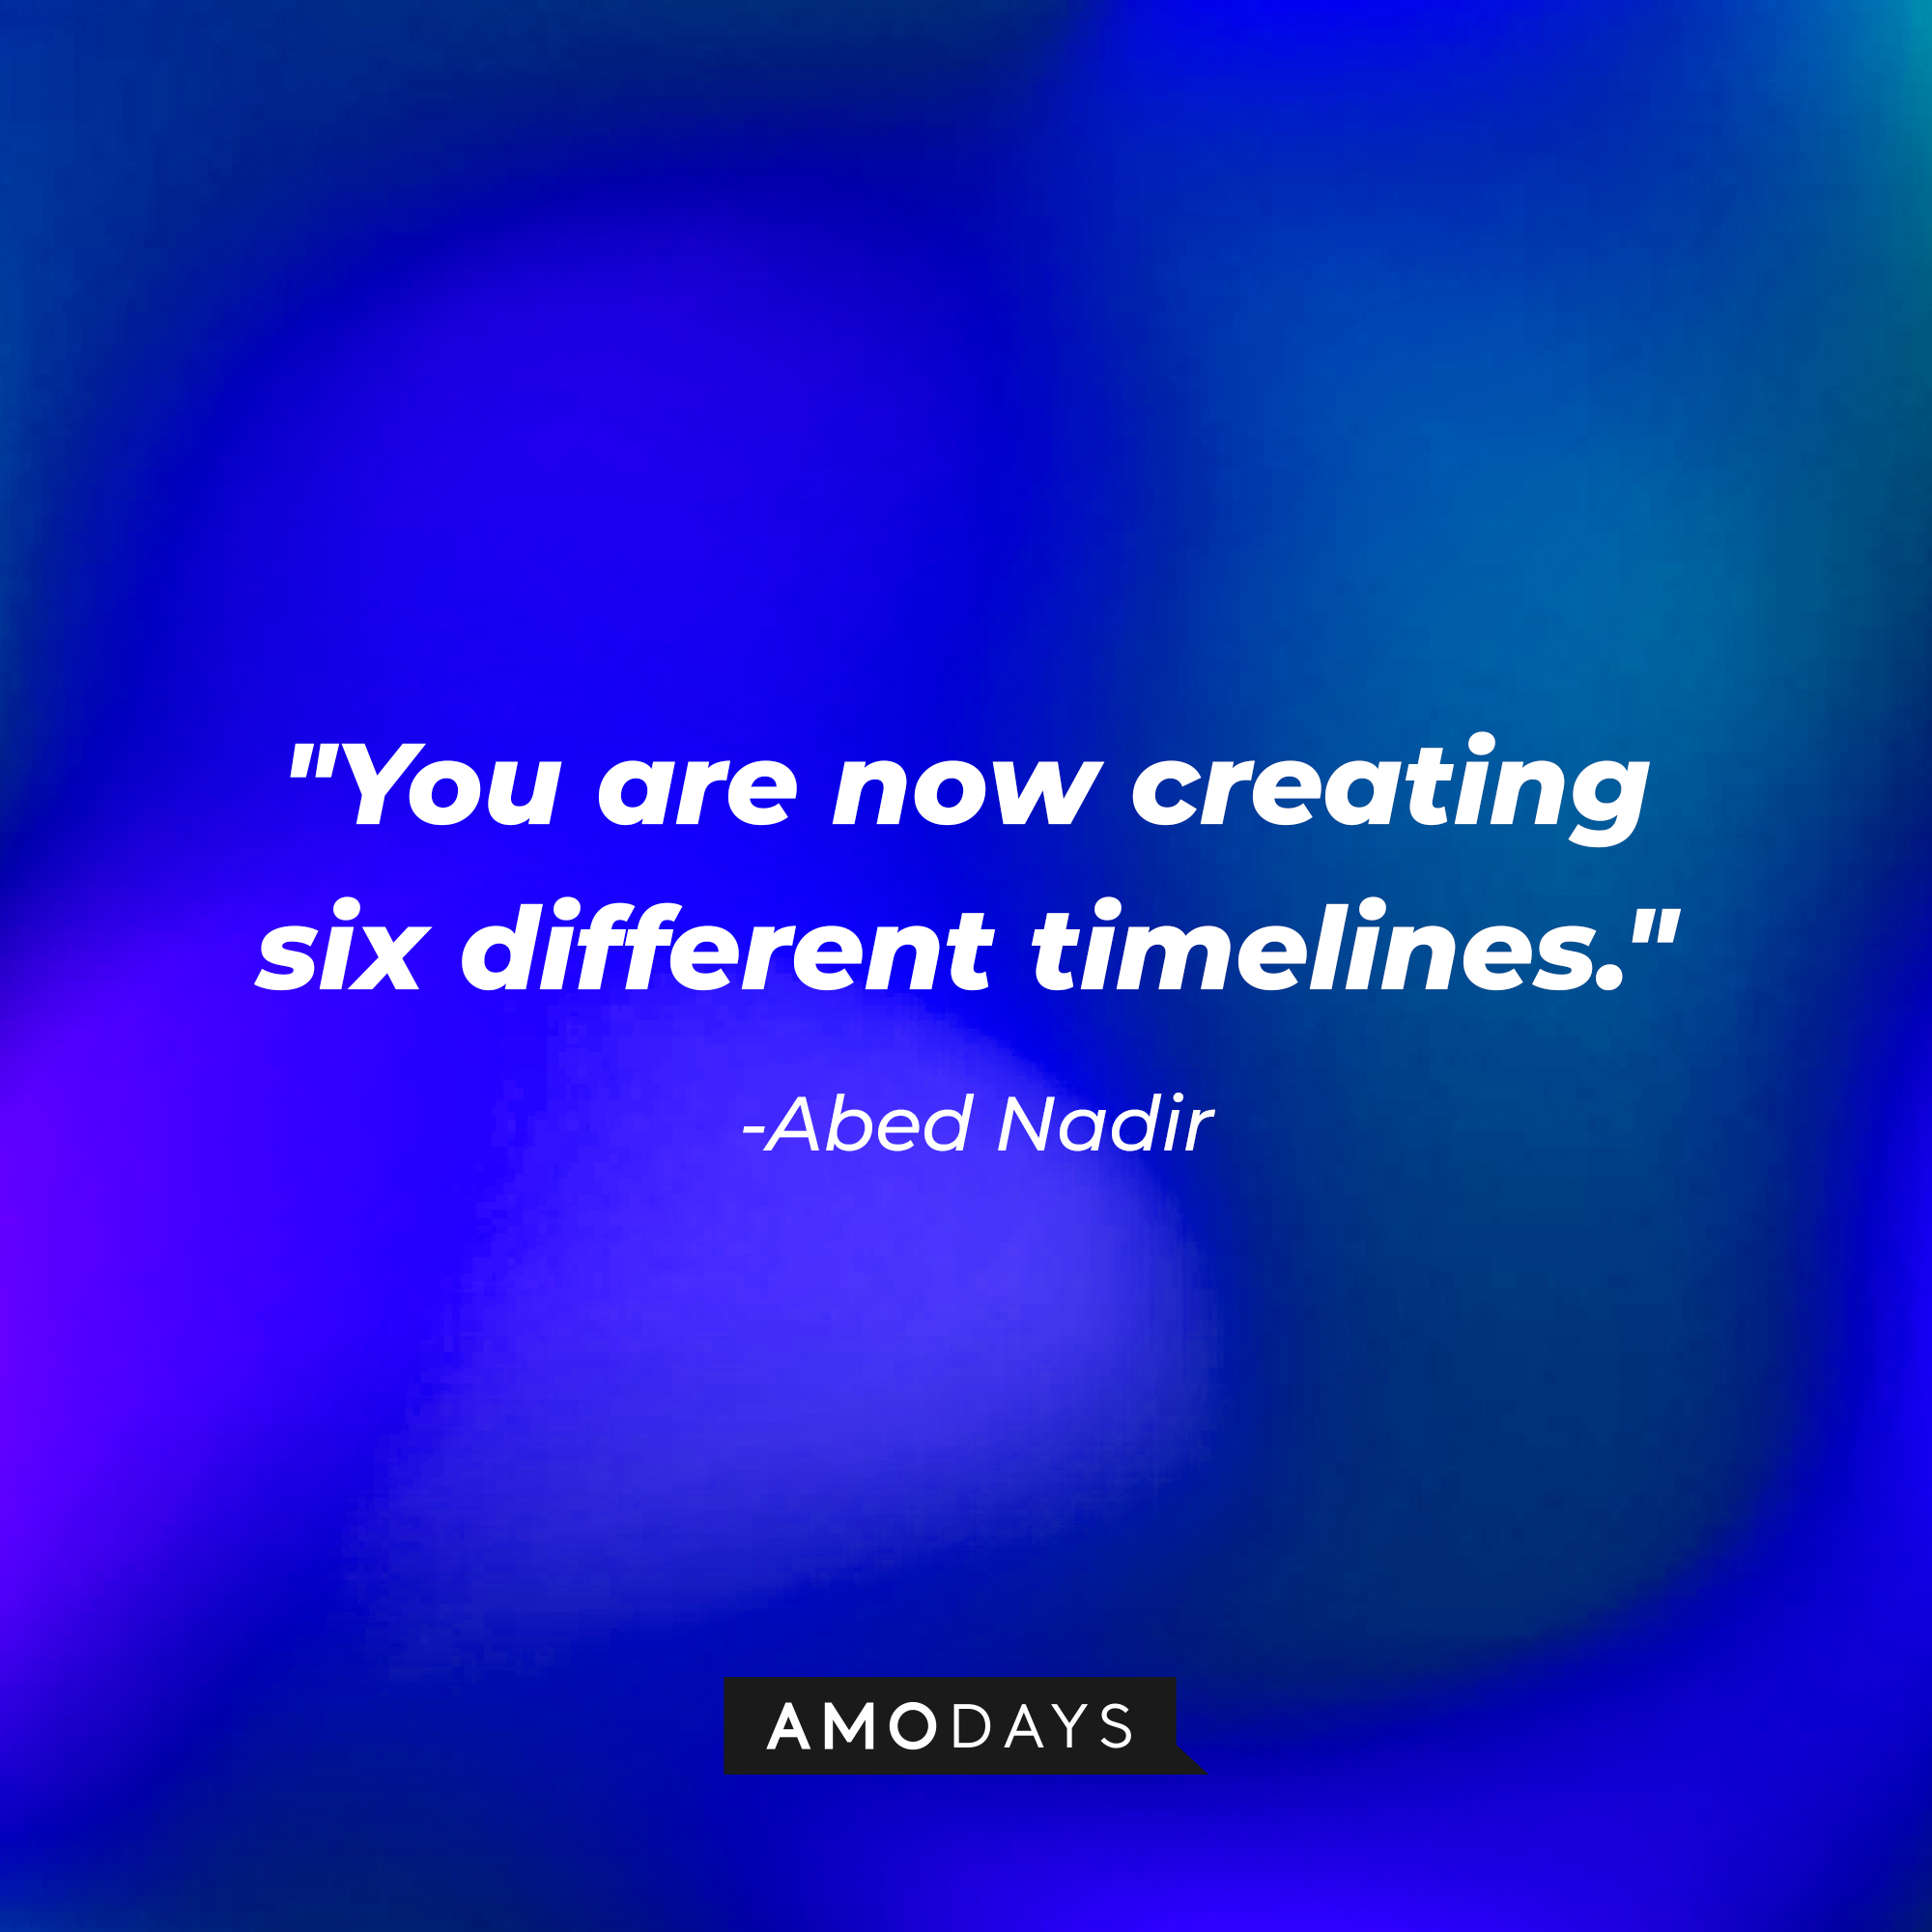 Abed Nadir’s quote: "You are now creating six different timelines." | Source: AmoDays